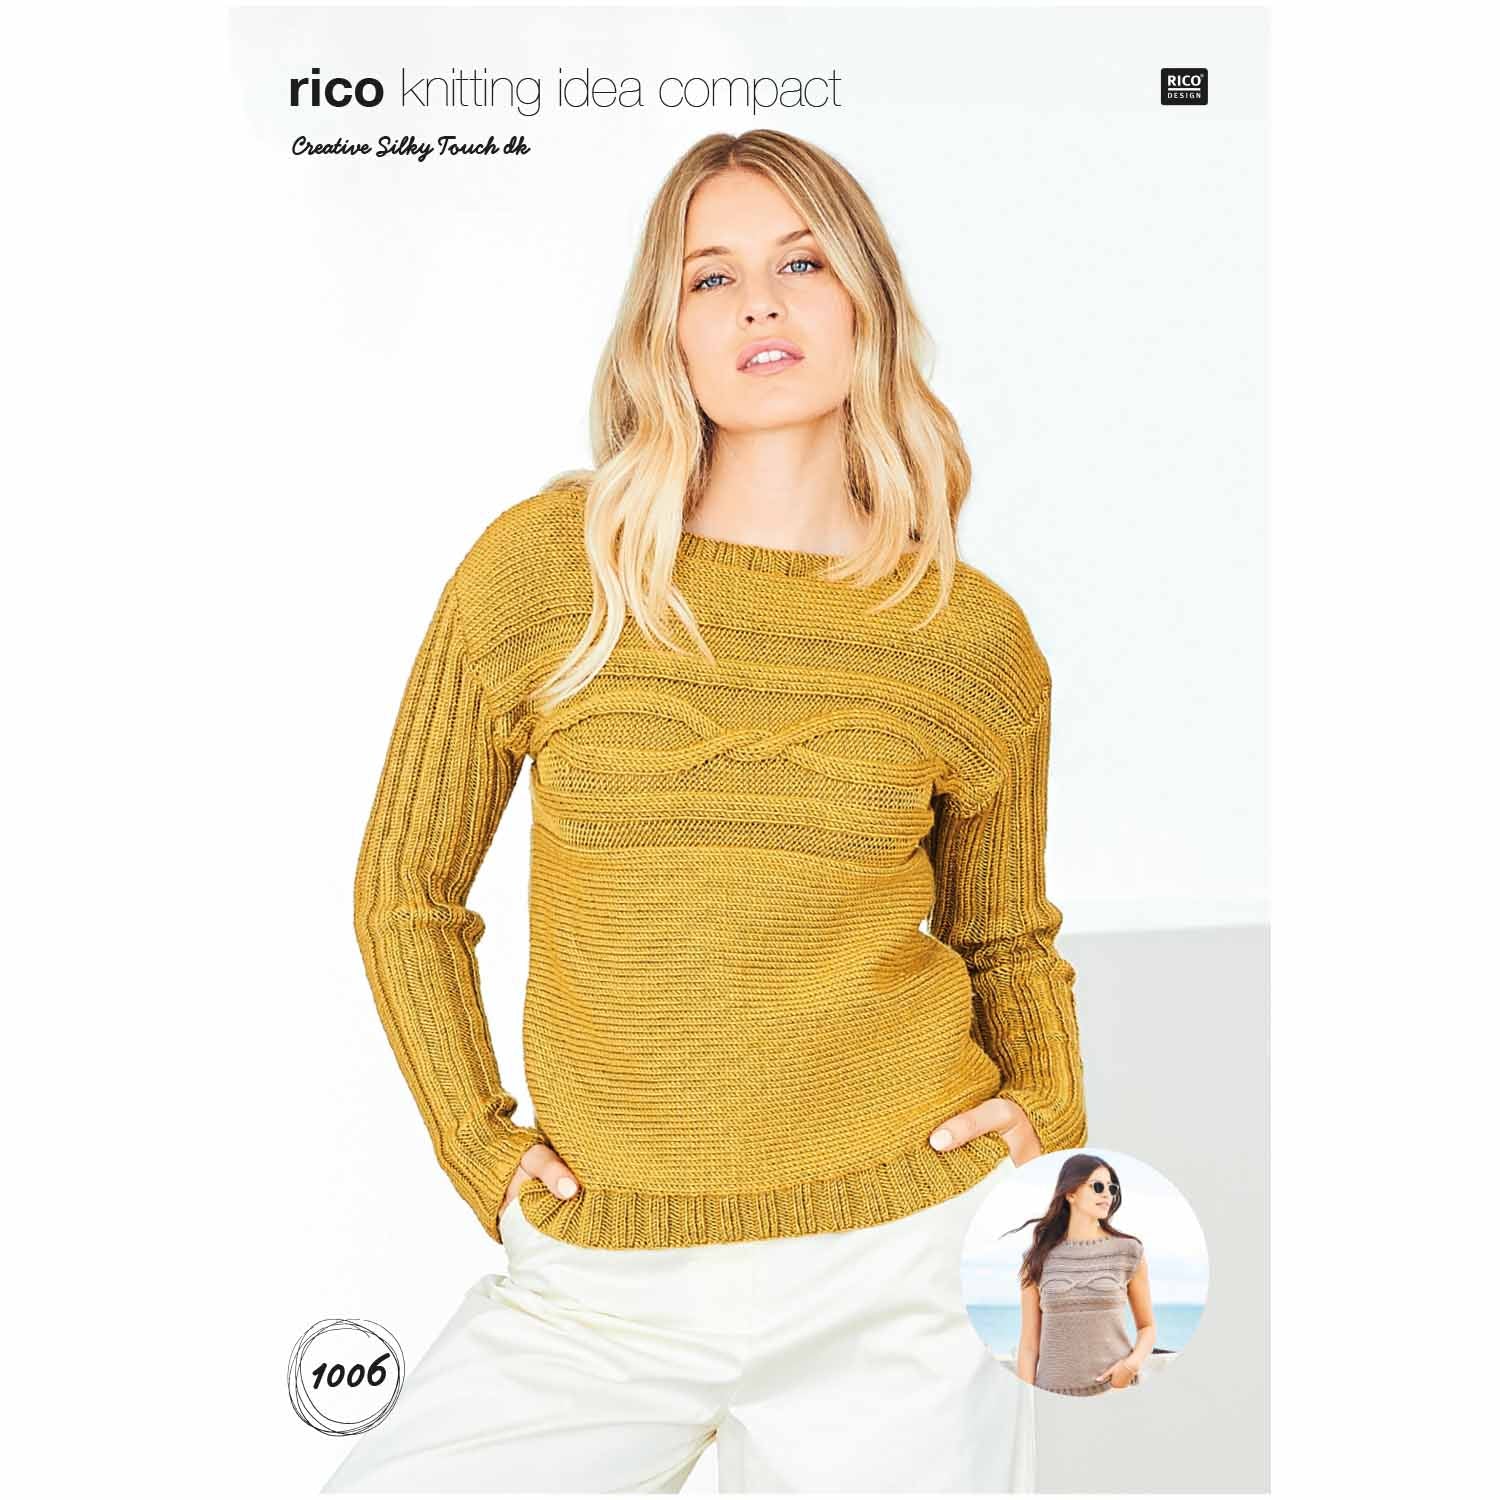 Rico Pattern 1006 Sweater and Top in Rico Creative Silky Touch DK